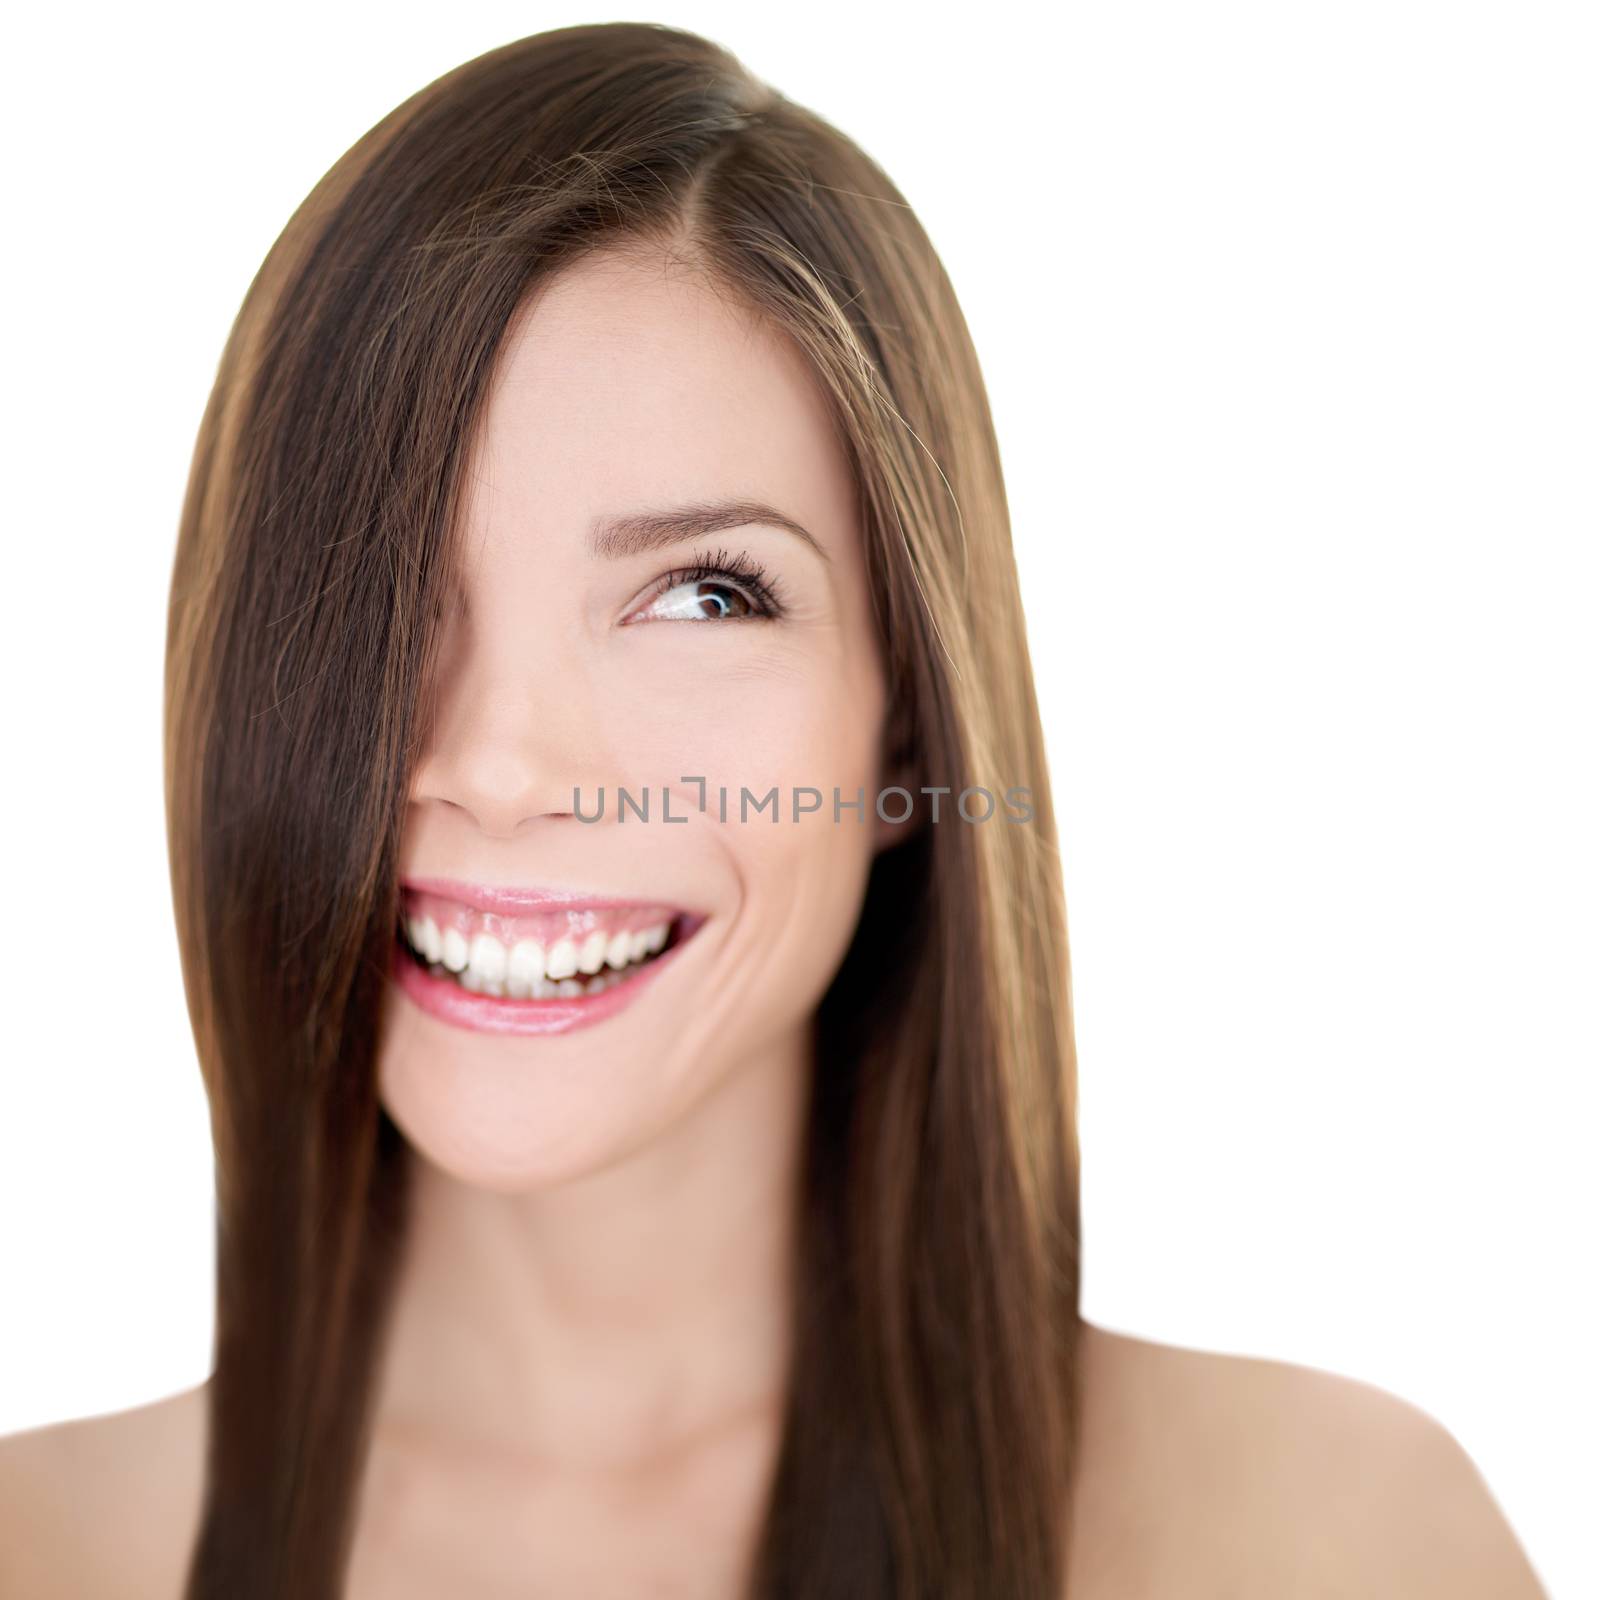 Hair care Asian woman smiling looking at white background copyspace. Beautiful girl with long straight brown hair for haircut or hairstyle beauty salon concept. Happy natural smile person by Maridav